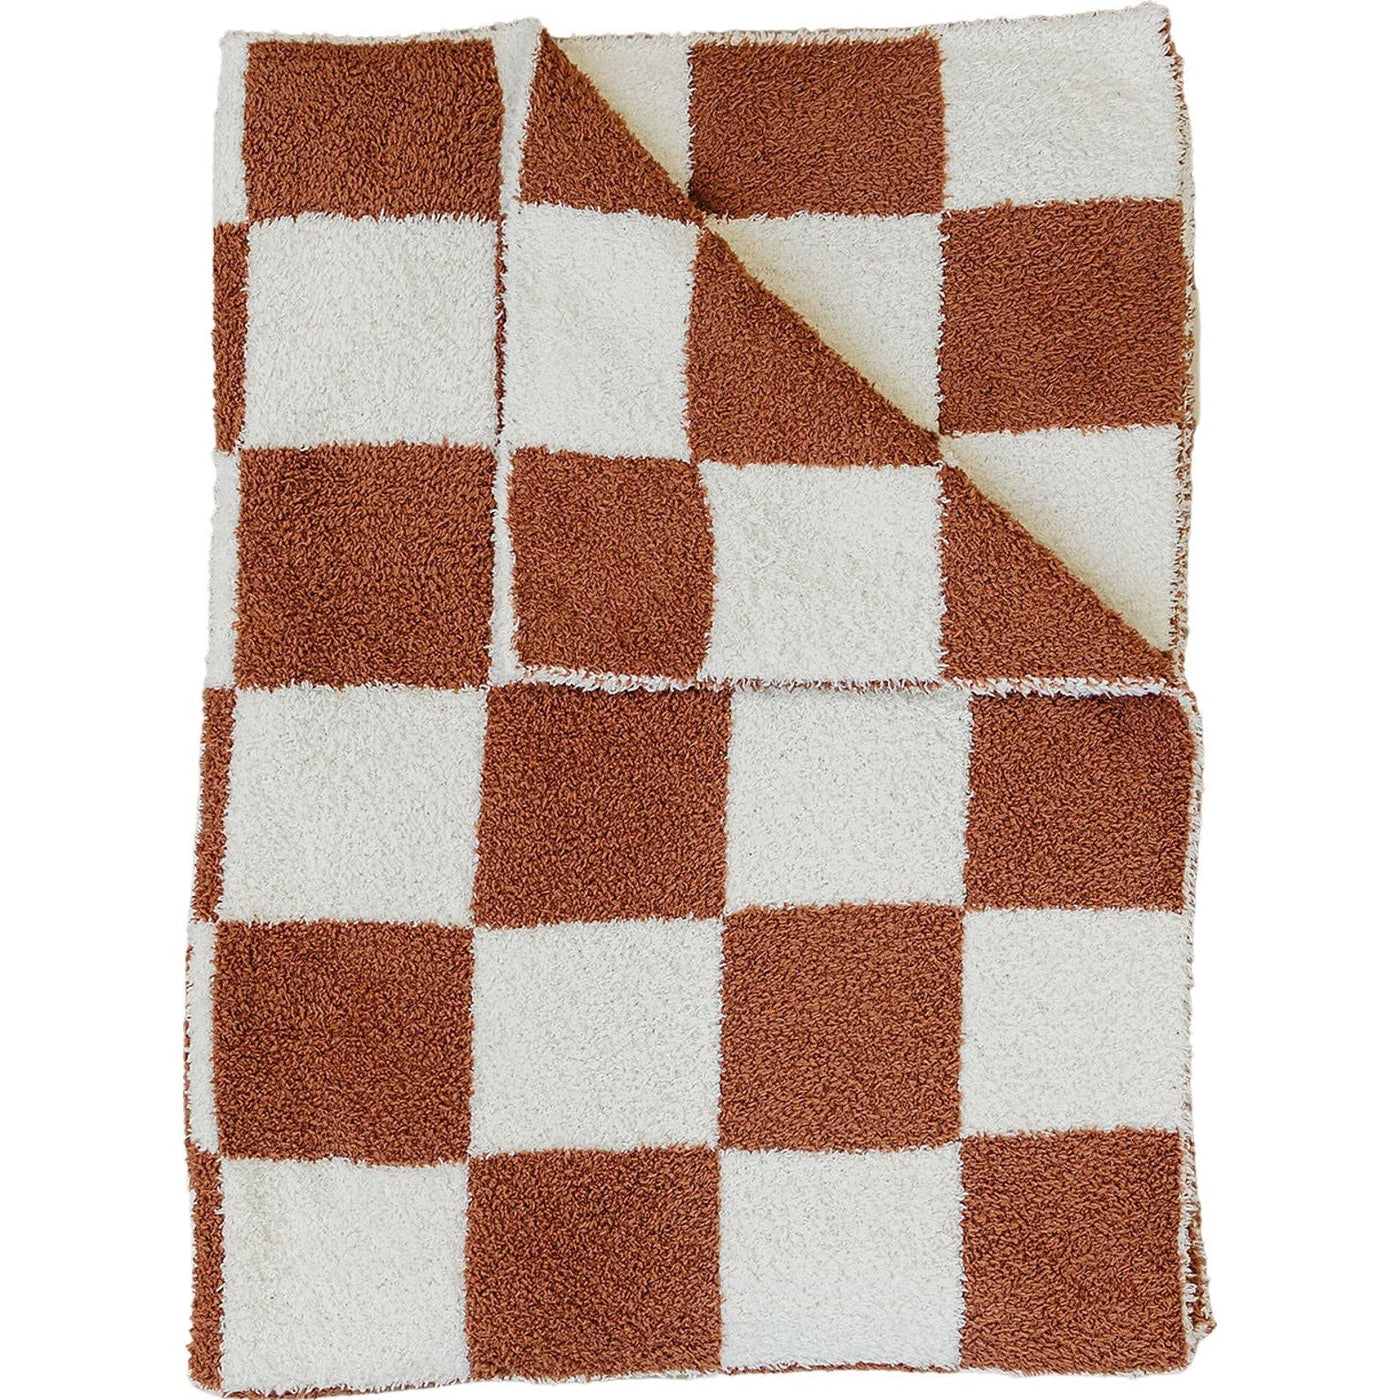 a brown and white checkered blanket